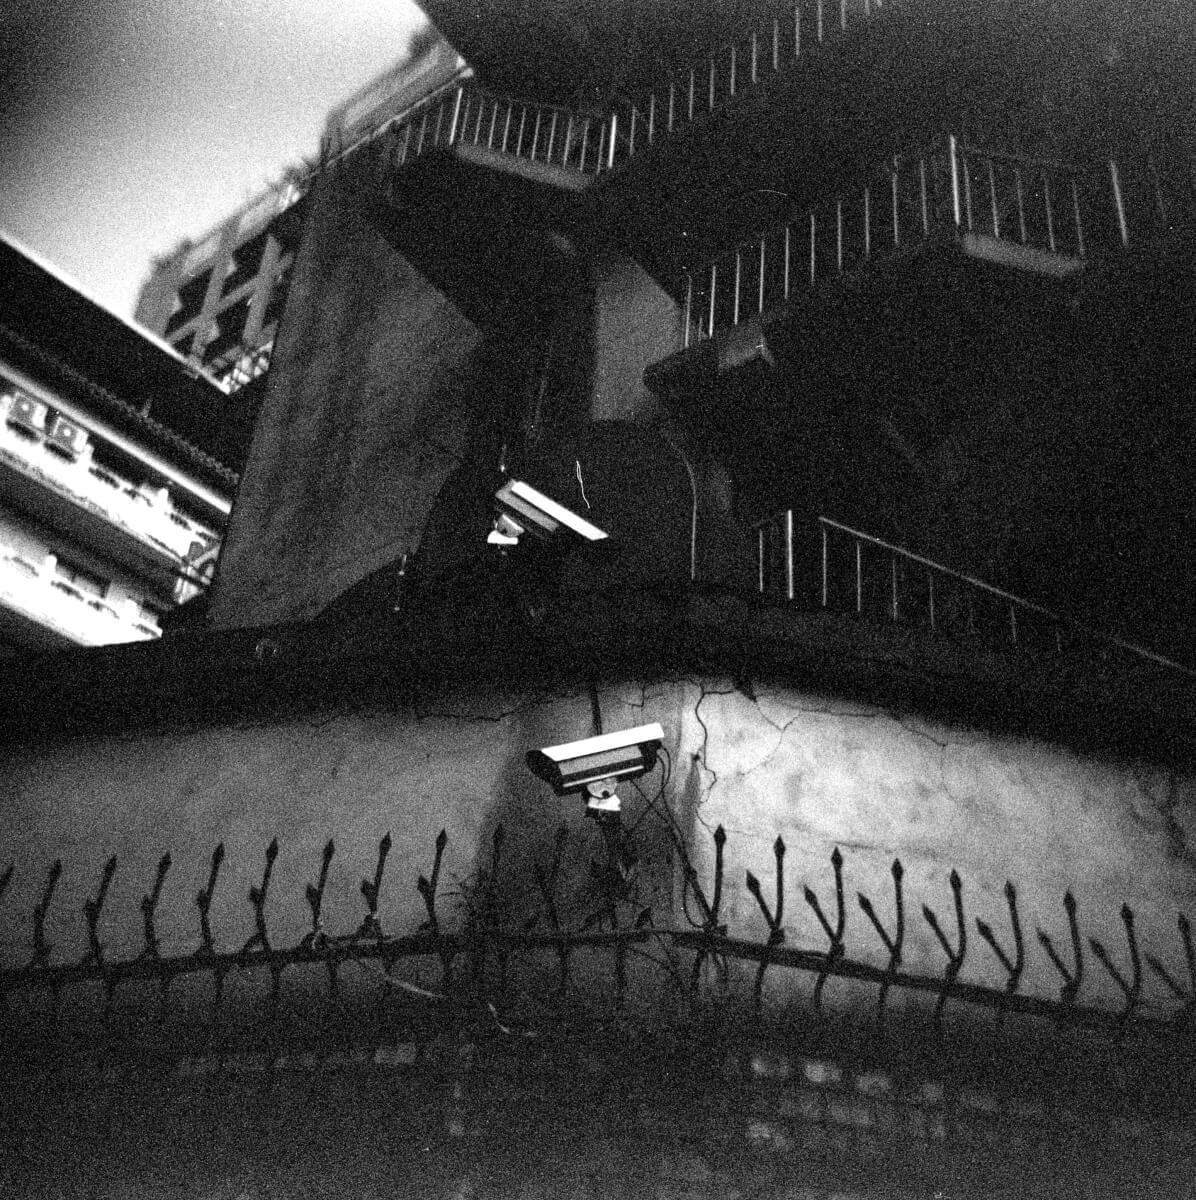 You've got you covered - shot at EI 800 (120 format) on a Kodak Tri-X 400.  Black and white negative film shot as 6x6 in 120 format.  Holga 120GN + 60mm f/8 Lens